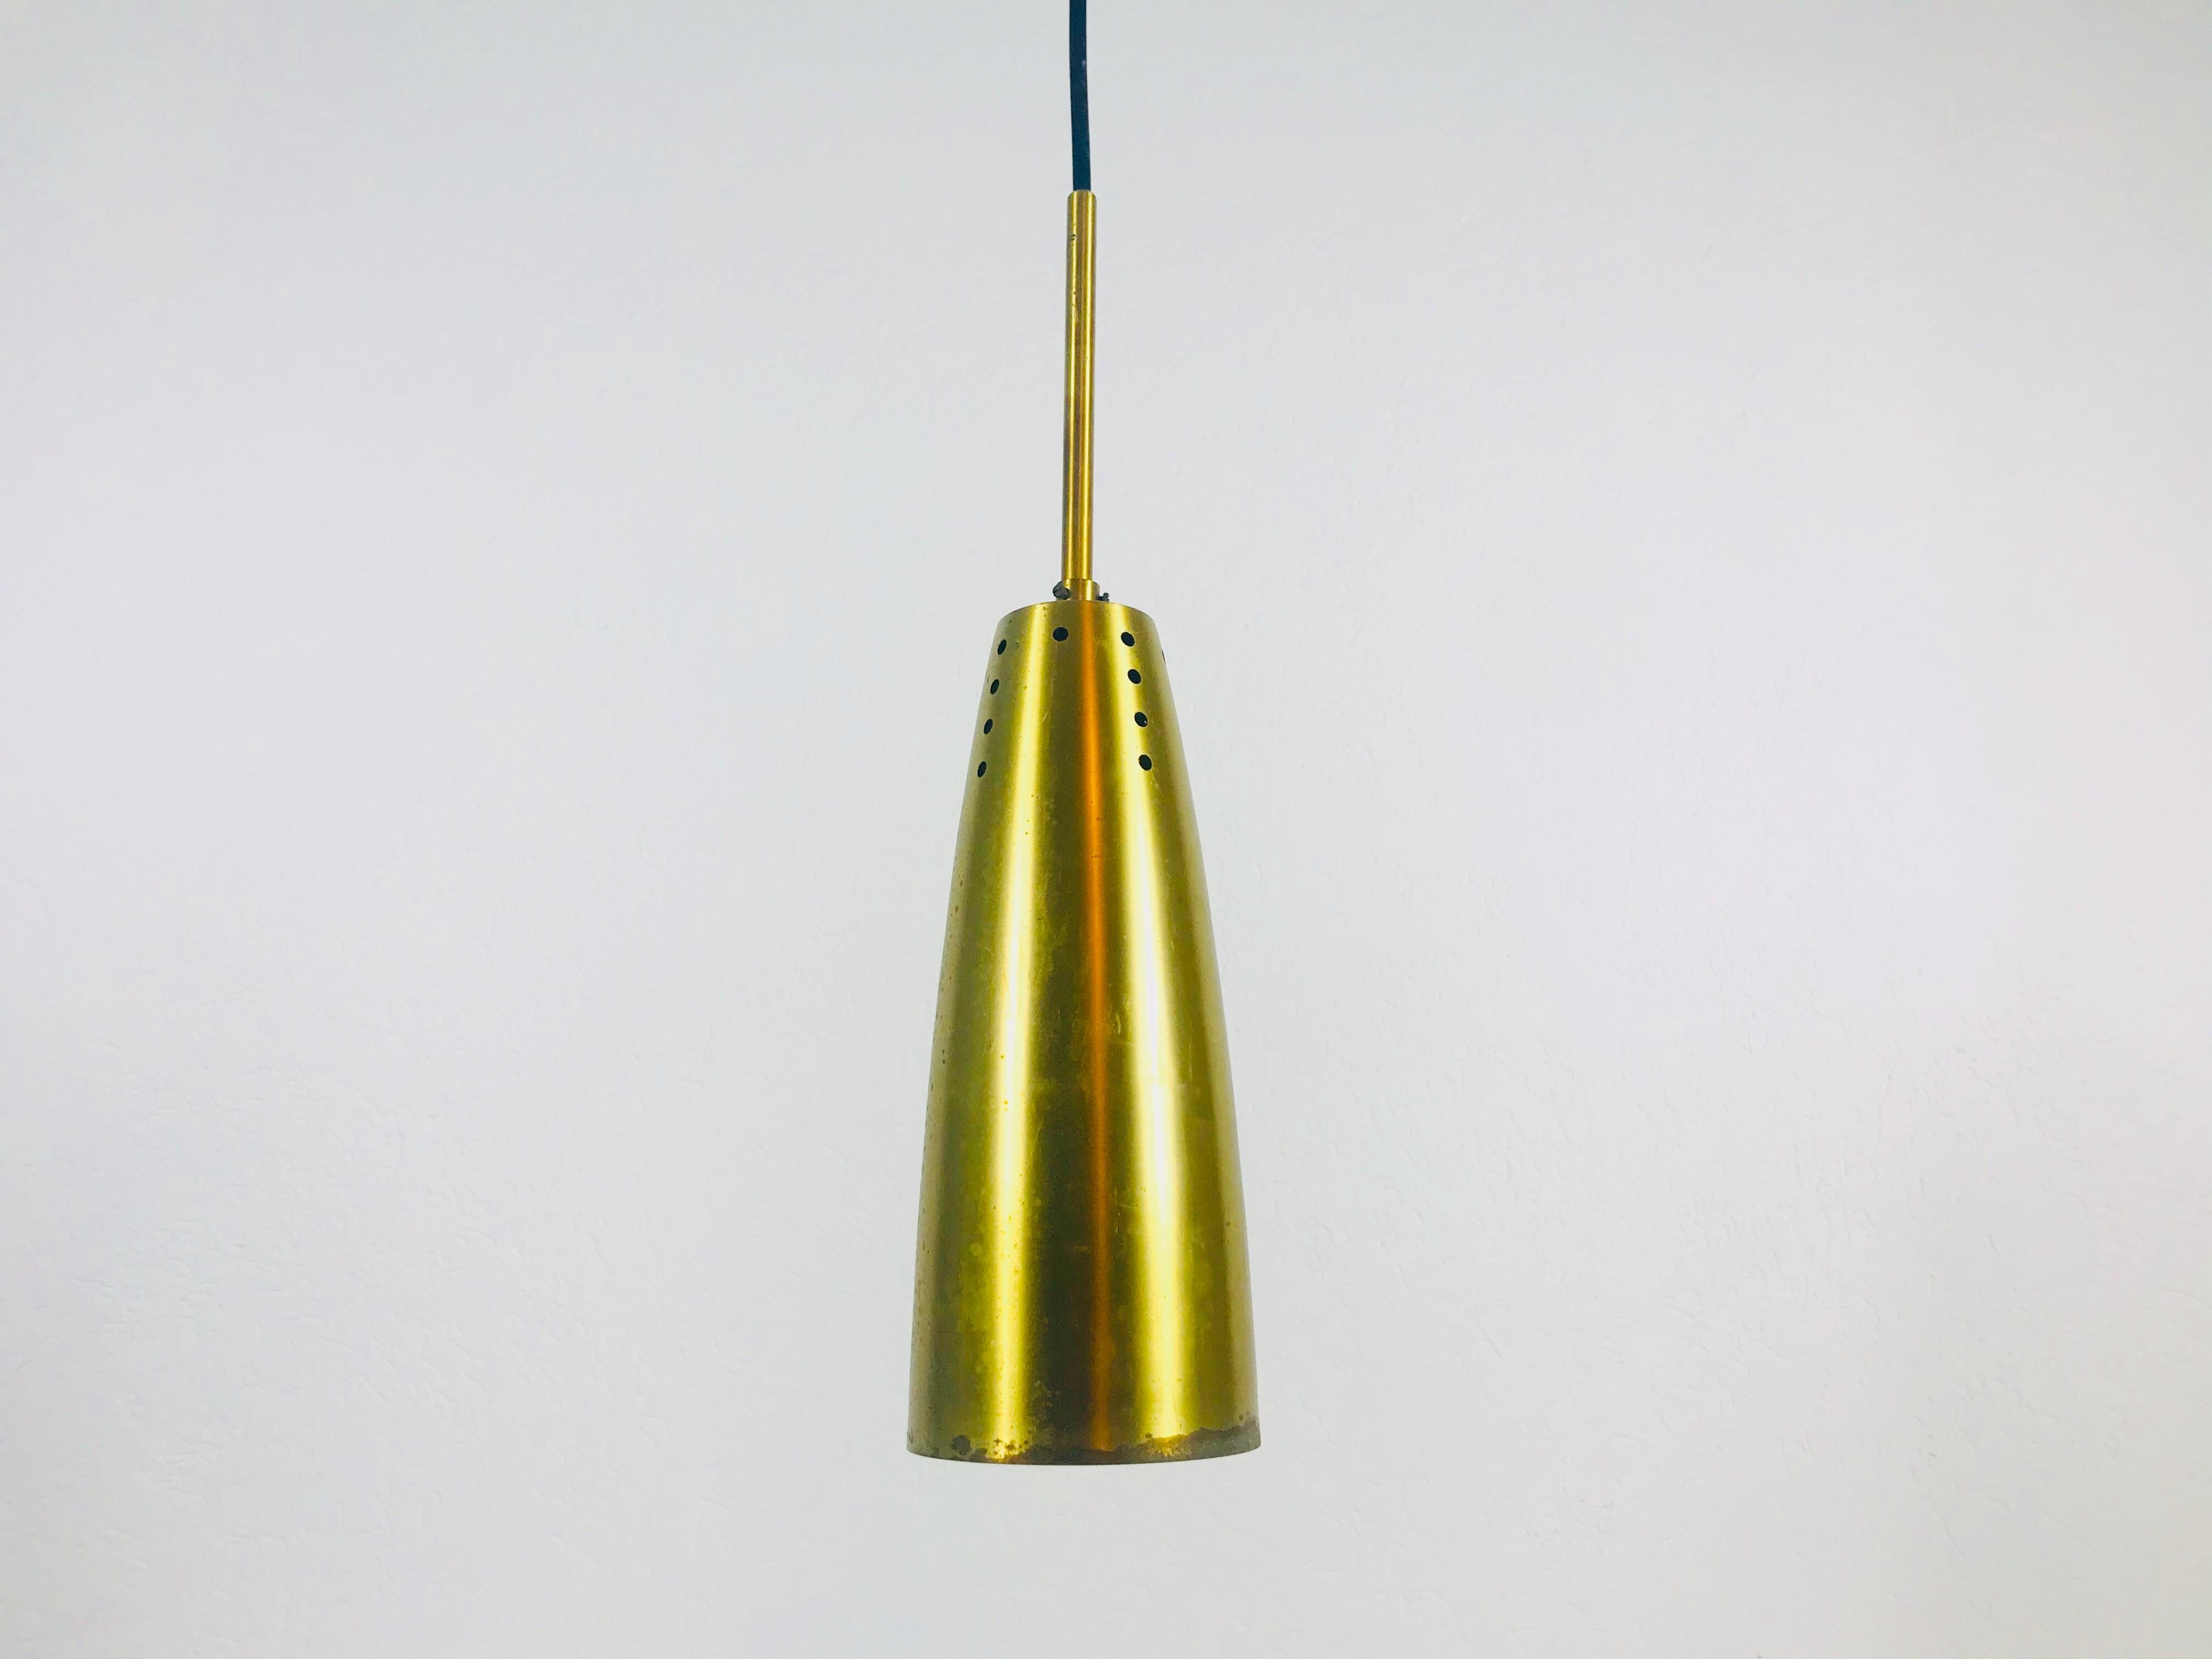 Pair of Full Brass Mid-Century Modern Pendant Lamps, 1950s, Germany For Sale 5